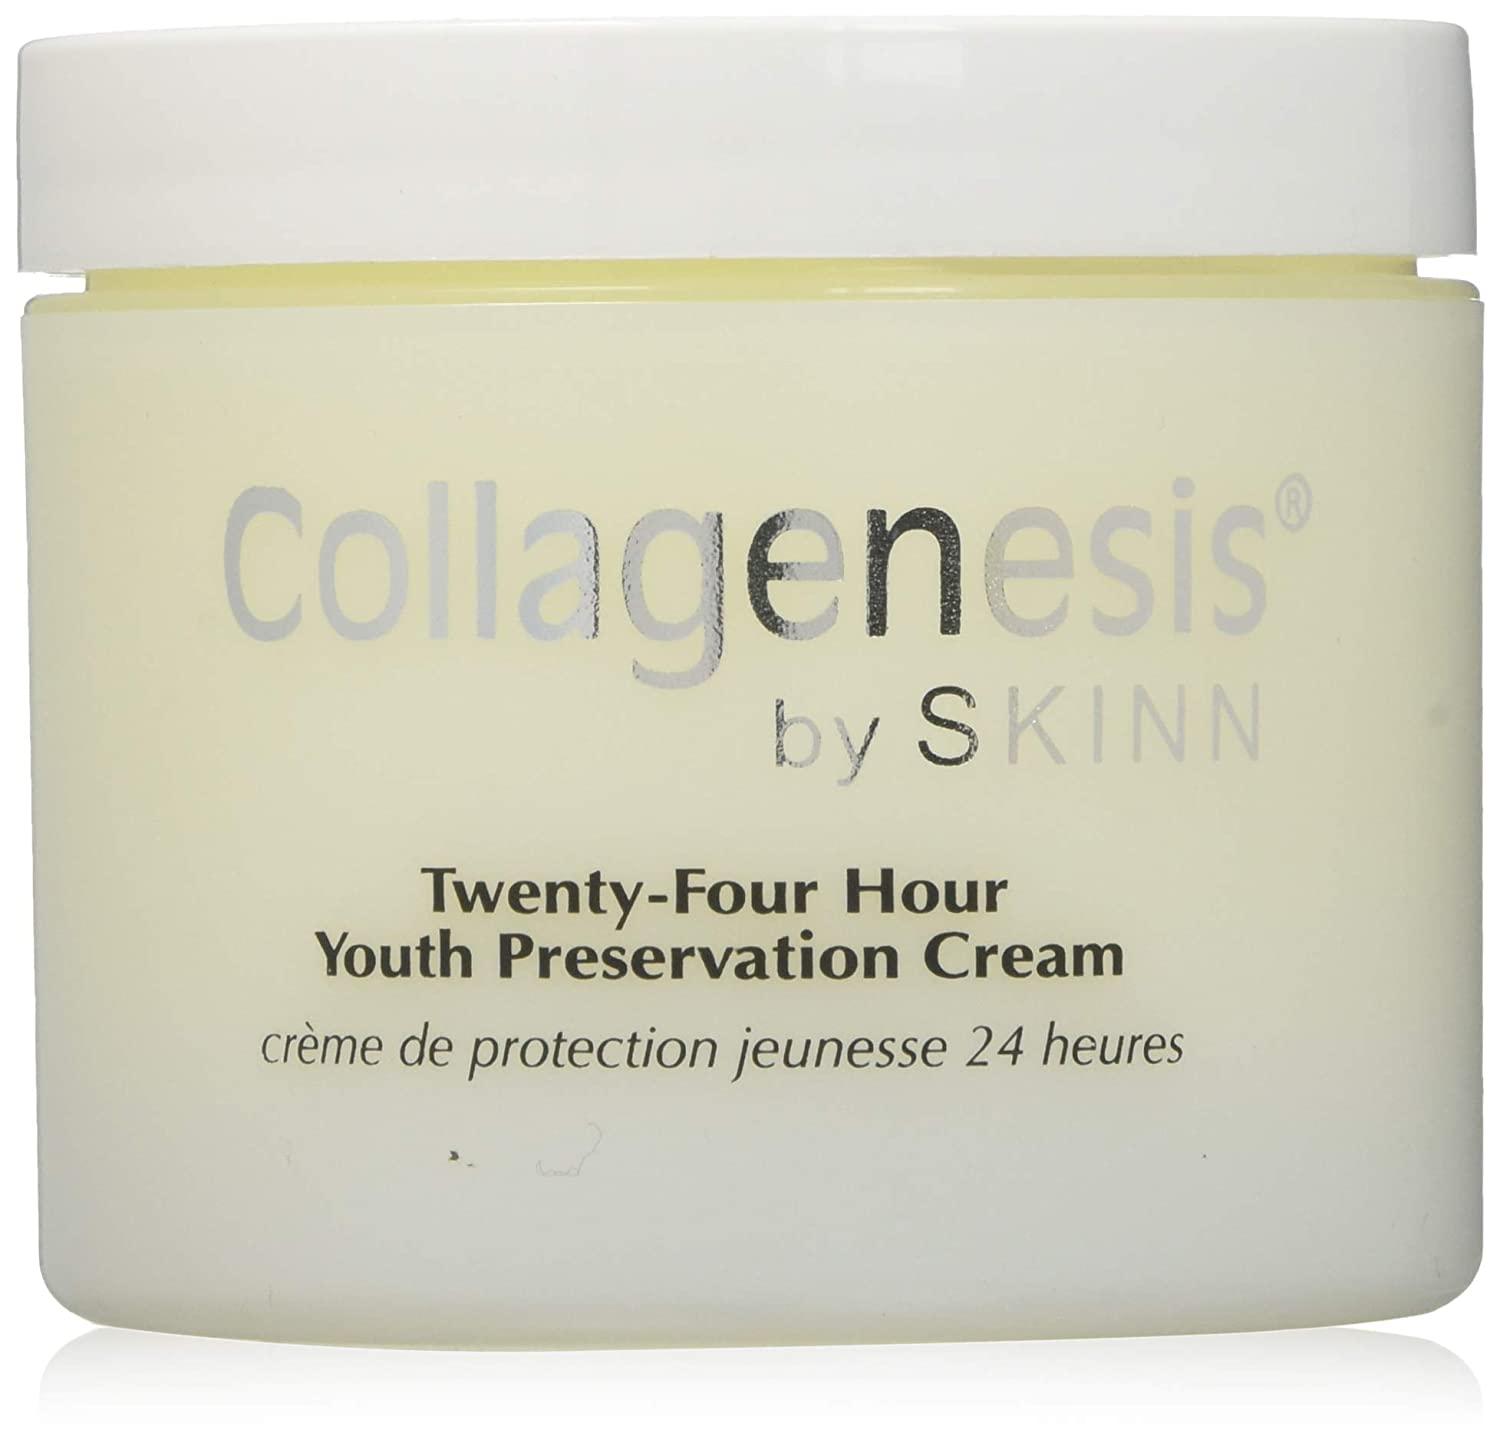 Collagenesis 24 Hour Youth Preservation Cream